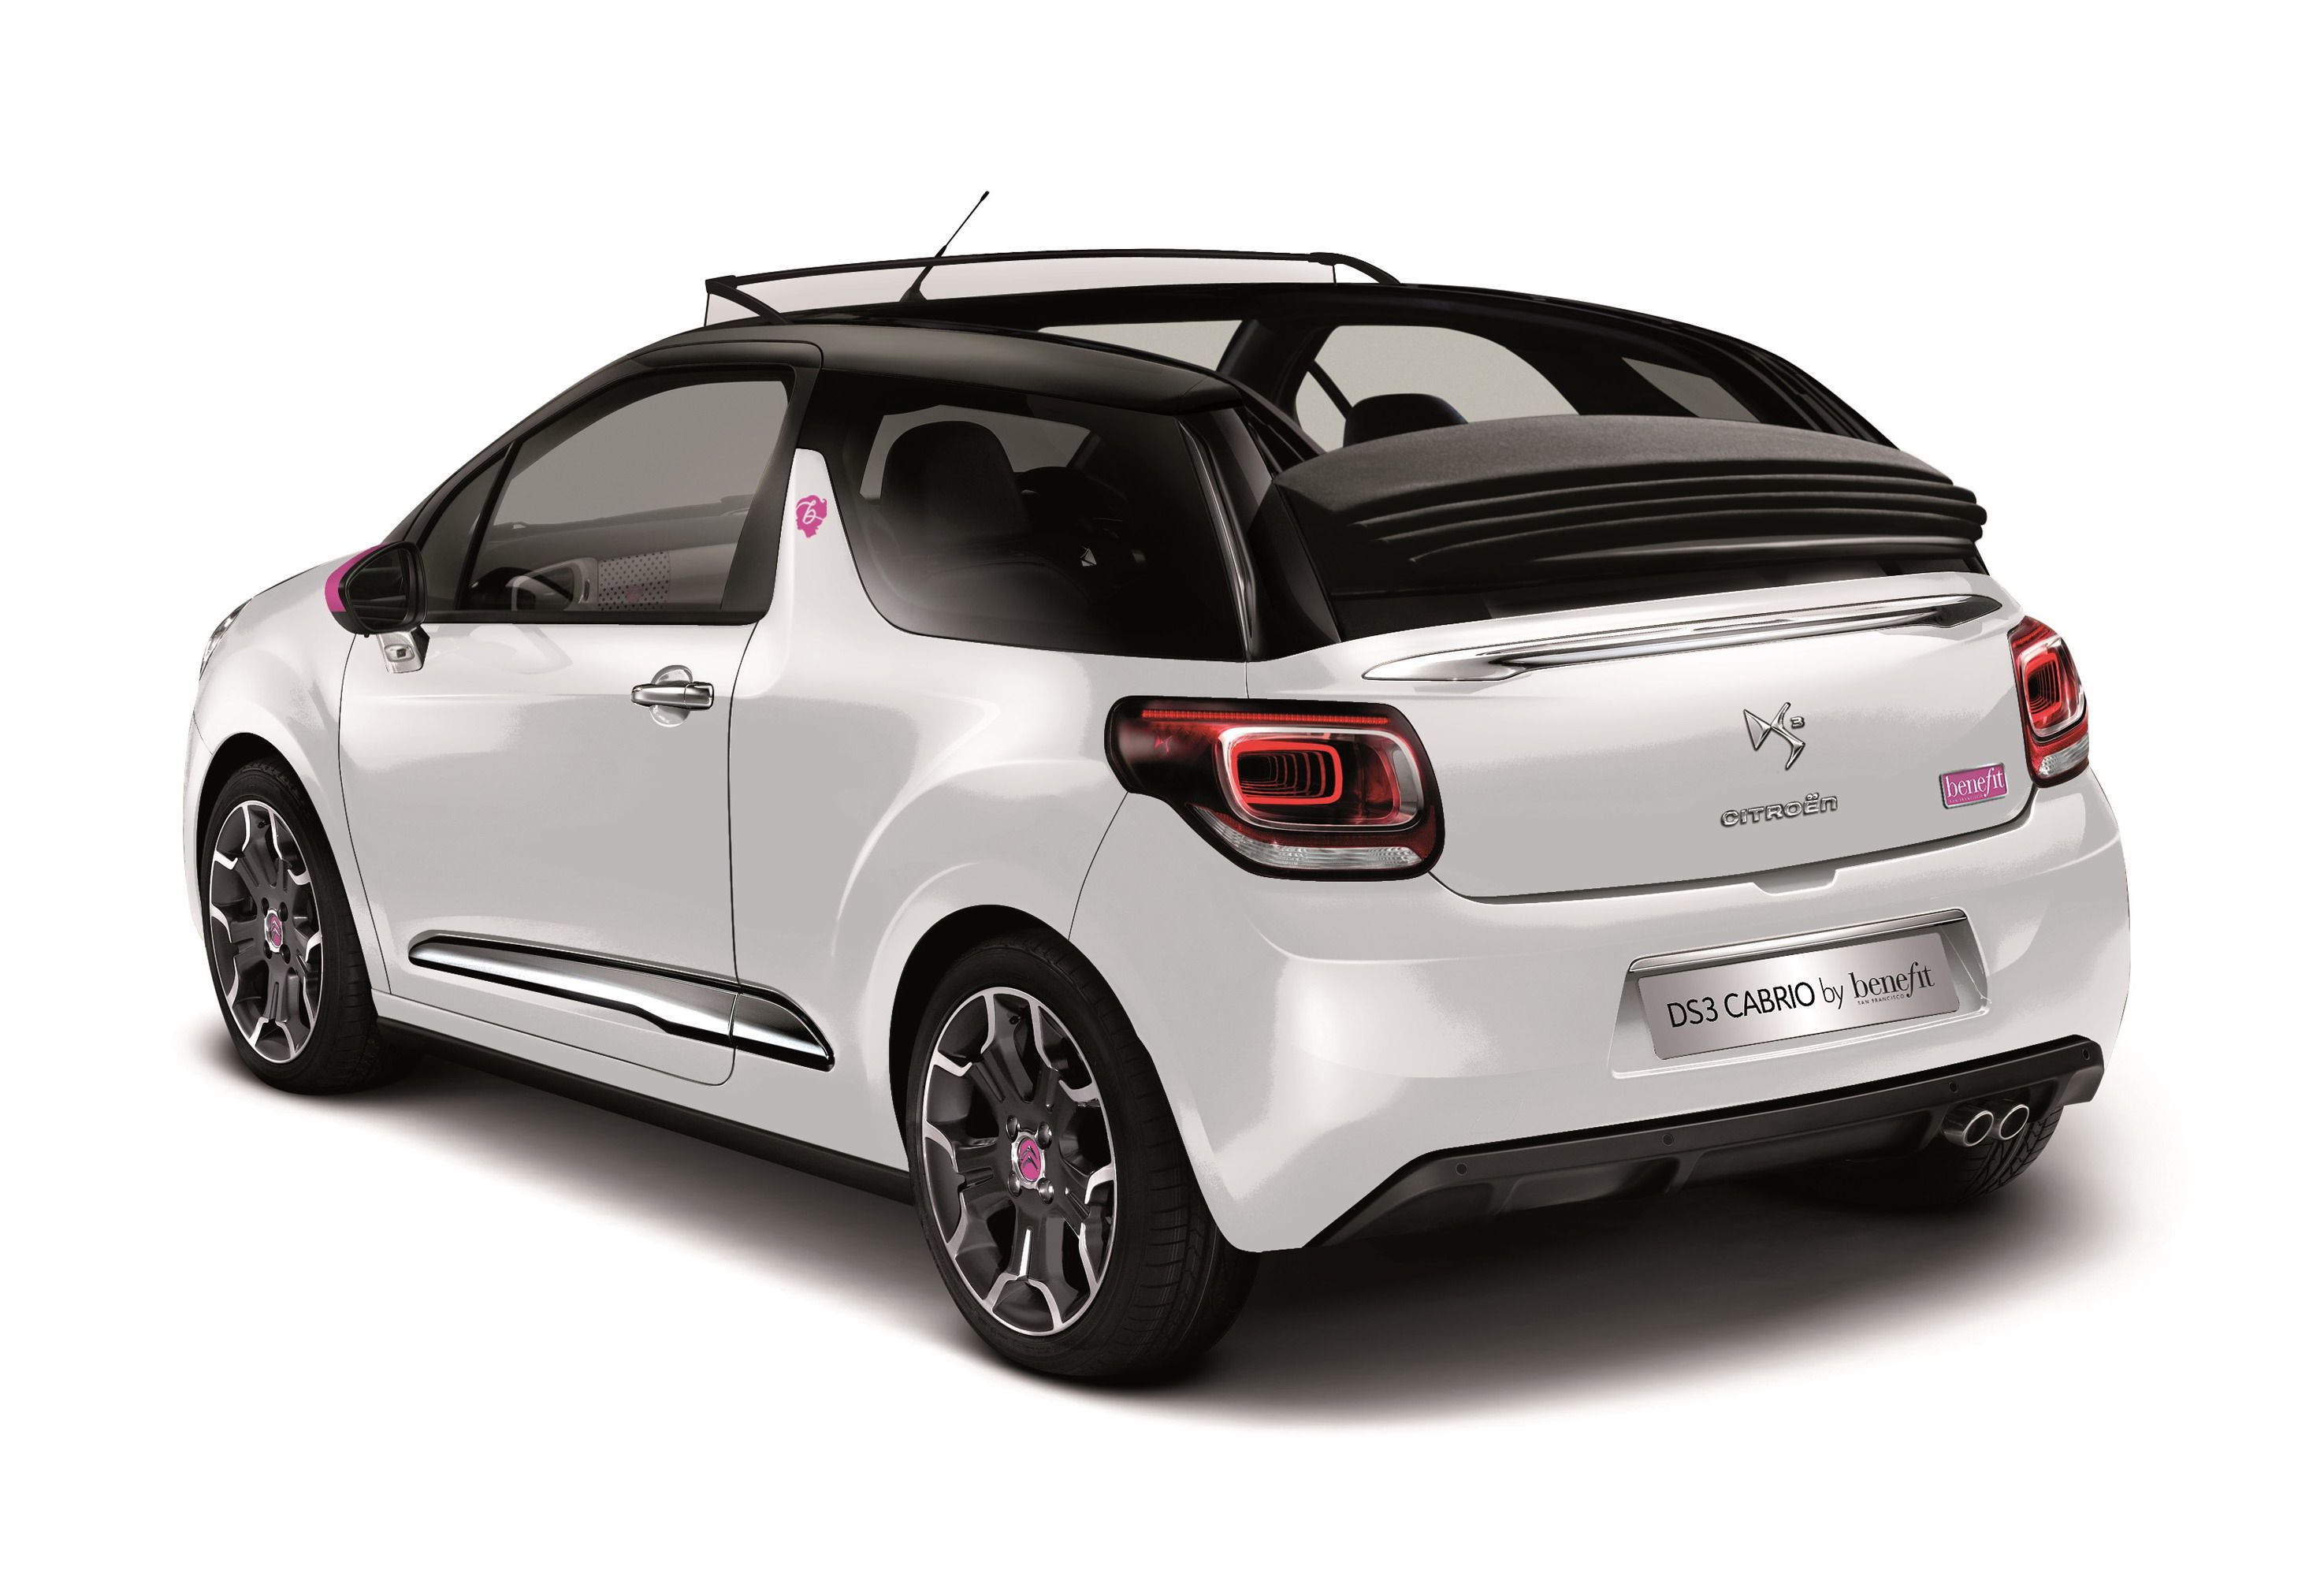 2014 Citroen DS 3 Cabrio DStyle by Benefit